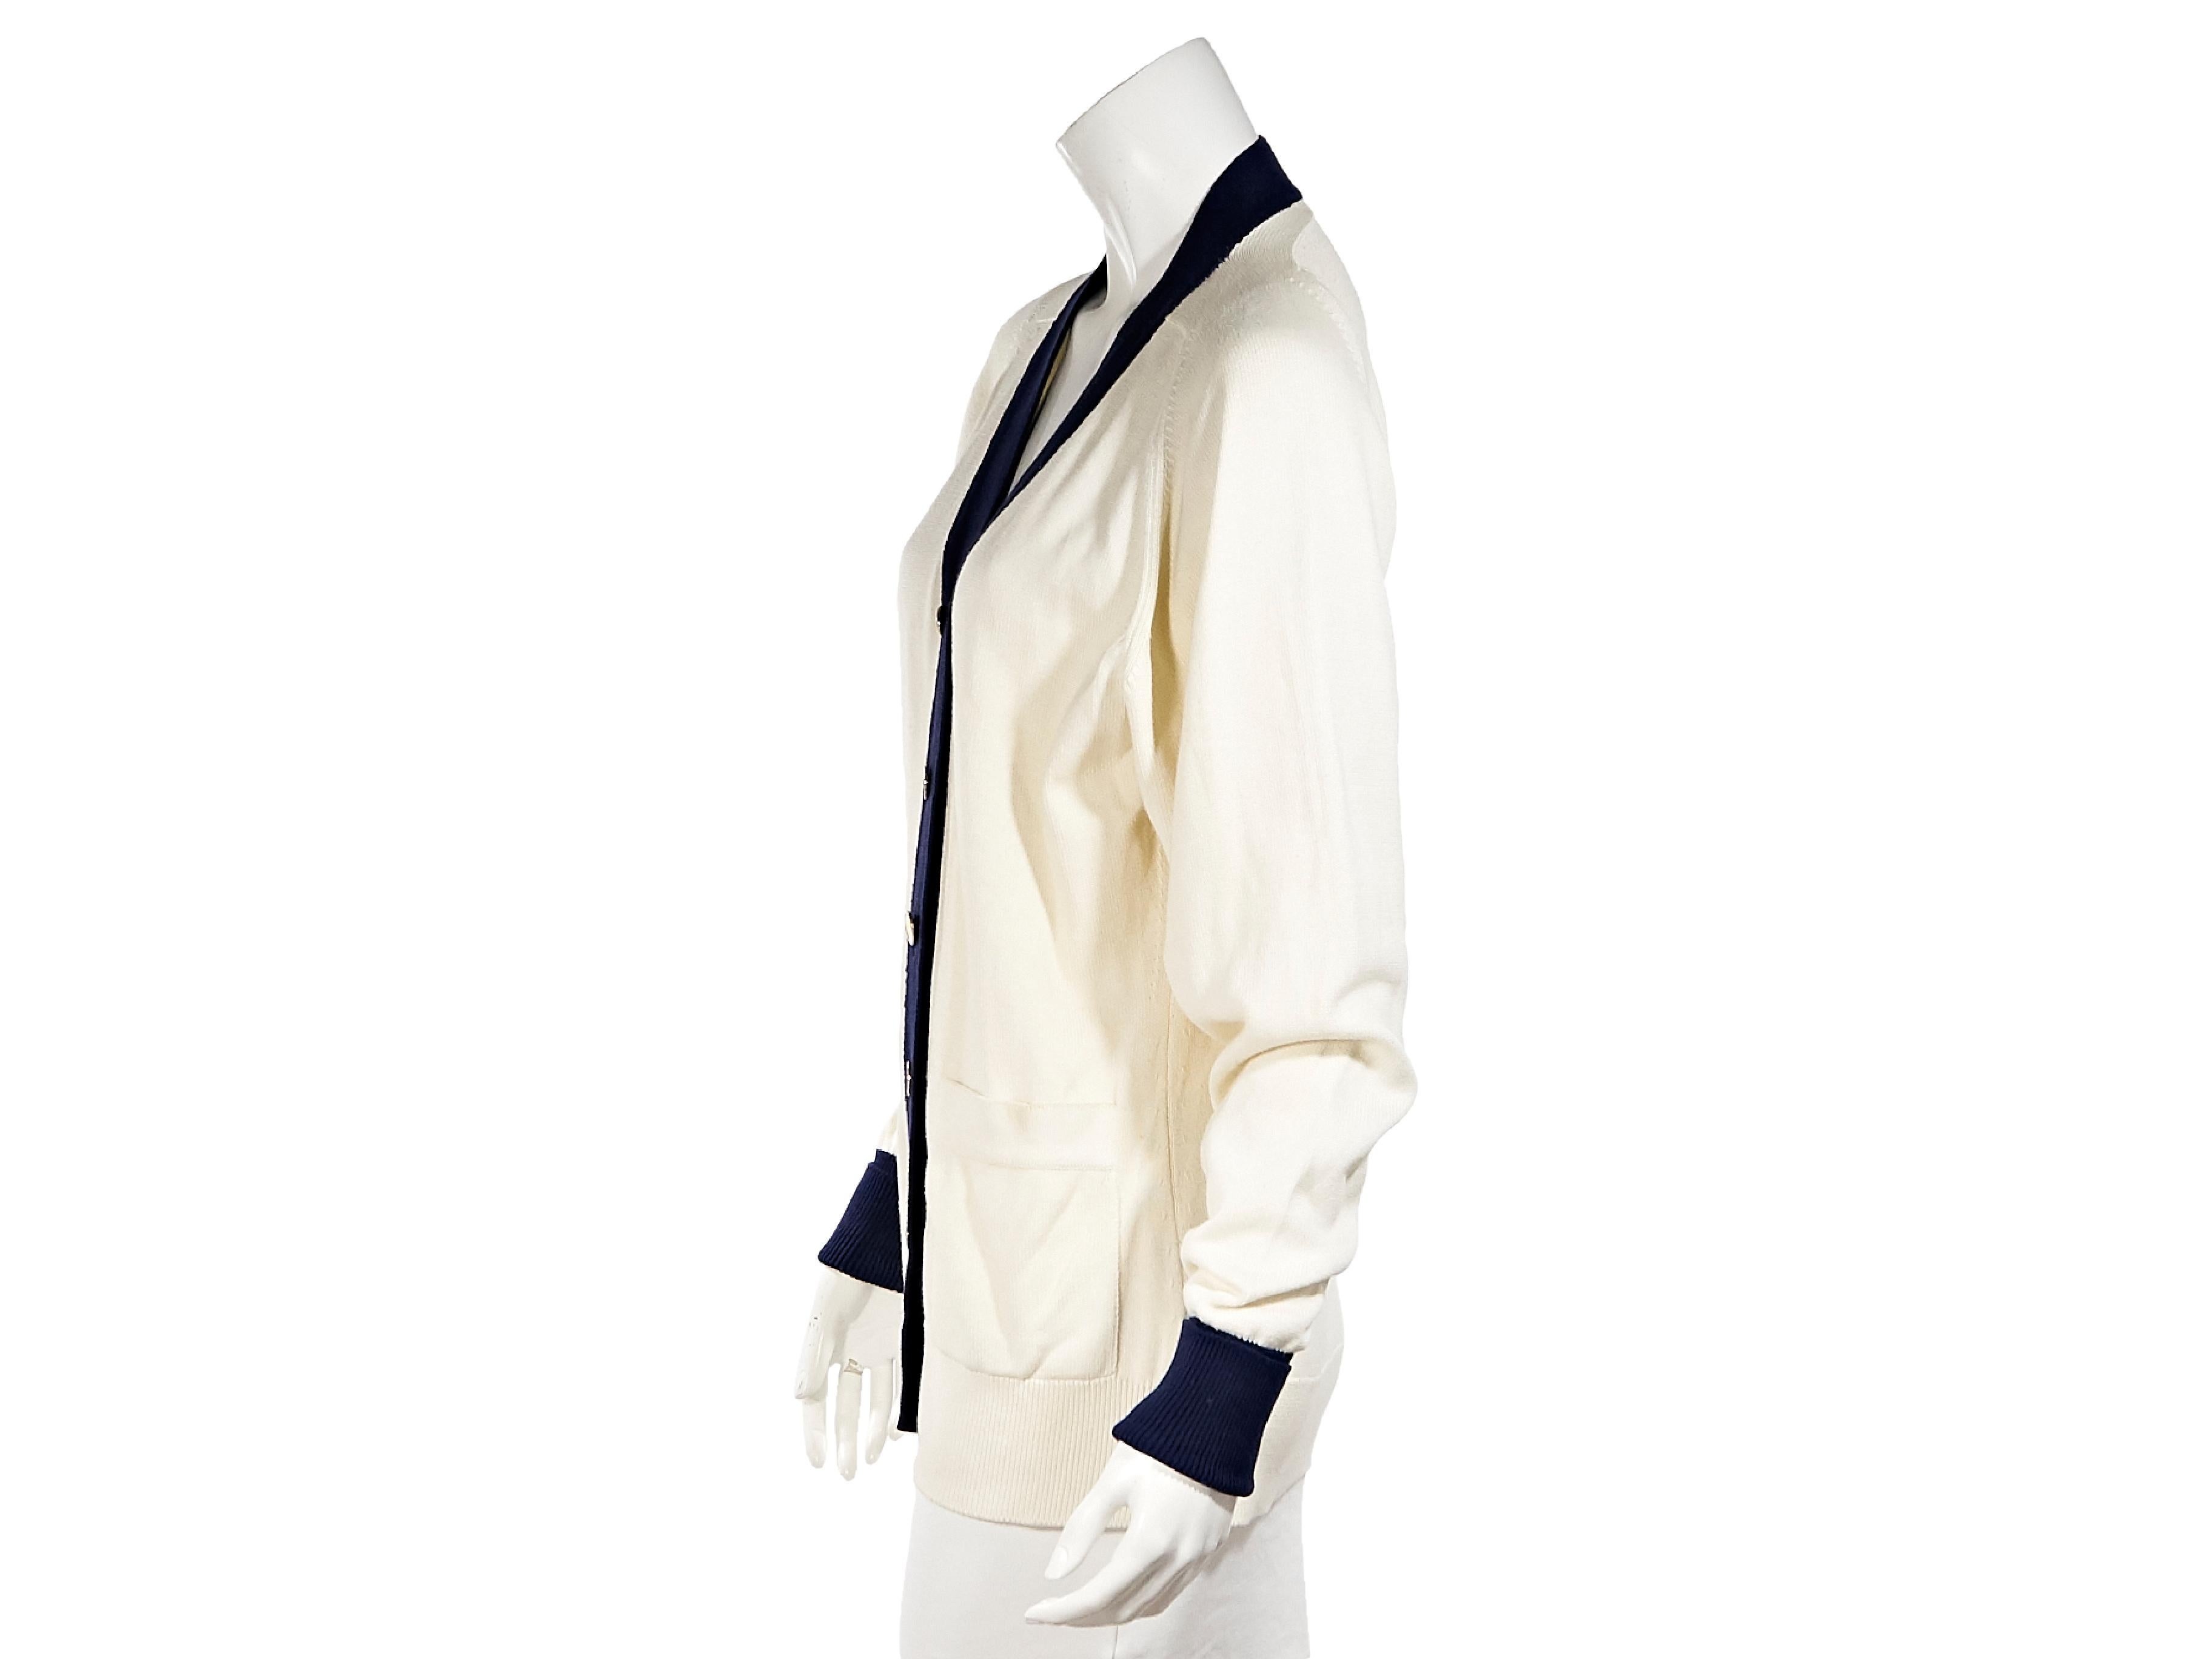 Product details:  Vintage white and navy blue cotton cardigan by Chanel.  V-neck.  Long sleeves.  Button-front closure.  Waist patch pockets.  Goldtone hardware.  37